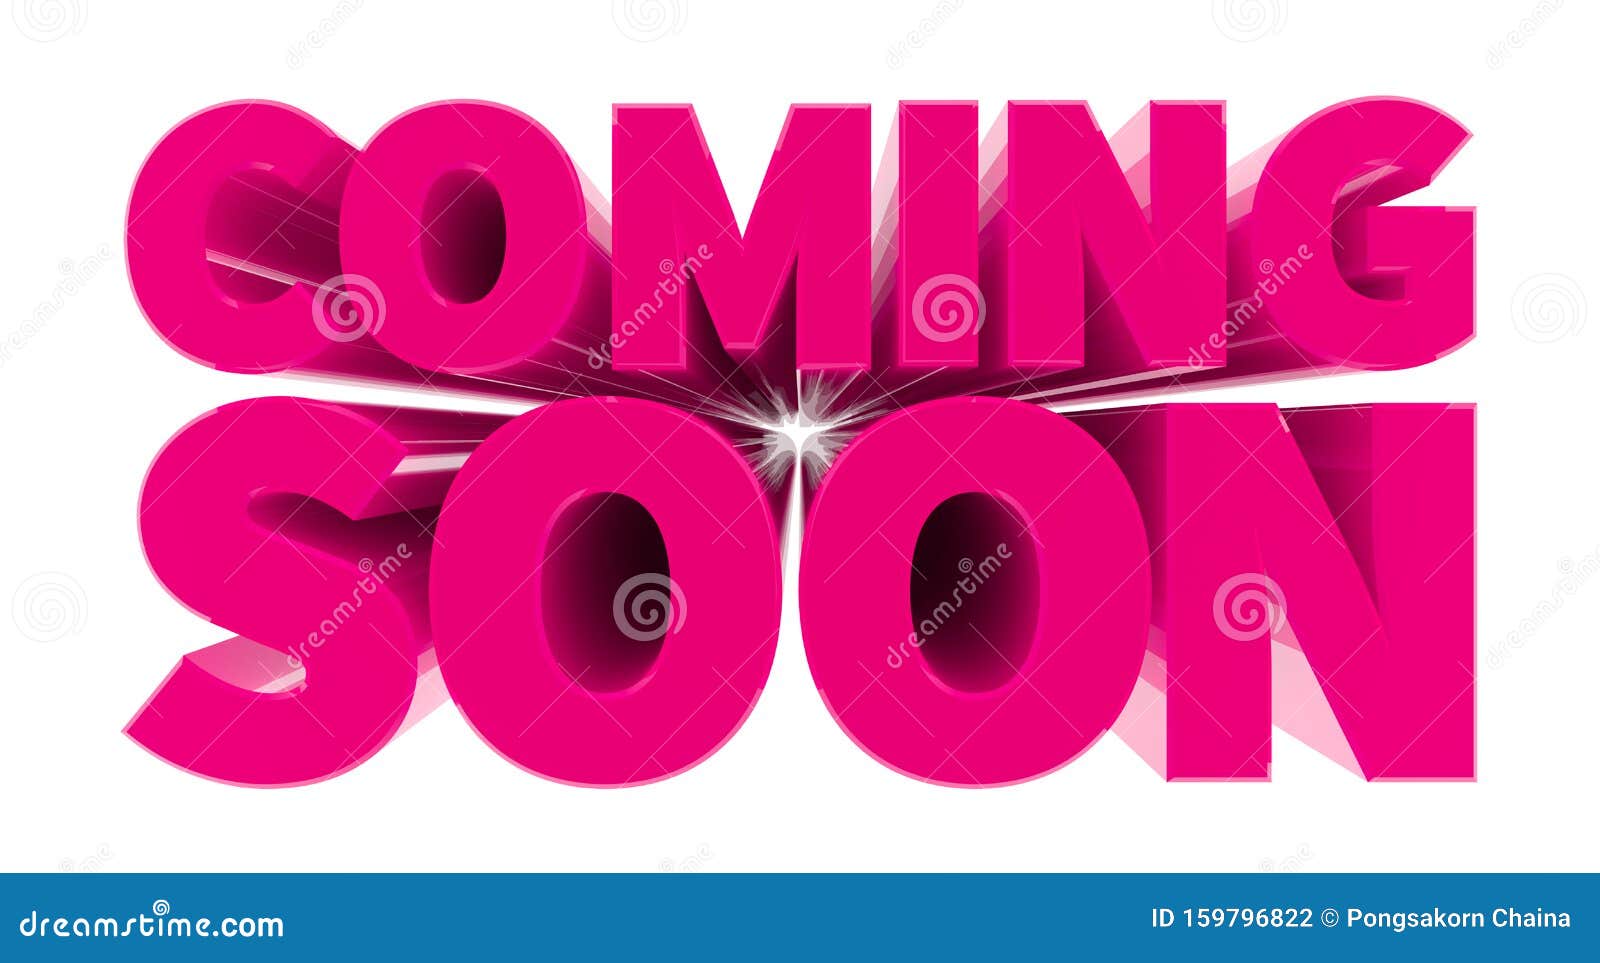 Pink Coming Soon Stock Illustrations 316 Pink Coming Soon Stock Illustrations Vectors Clipart Dreamstime